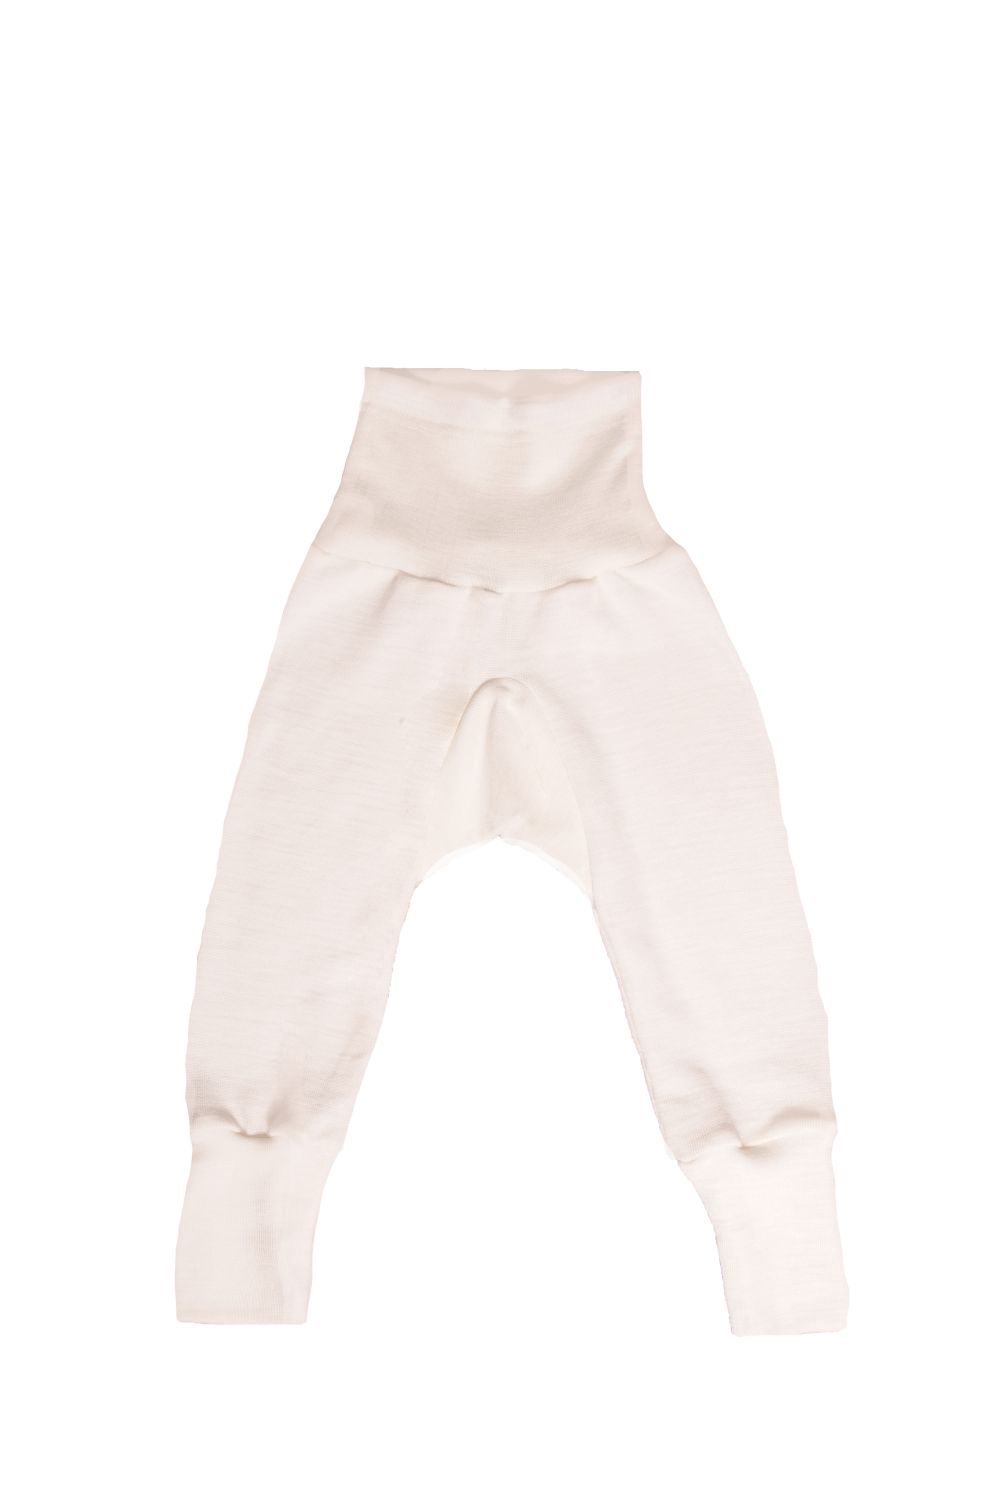 Cosilana baby pants with waistband (wool/silk) (Size: 074/080 / Colour: 01 natural)